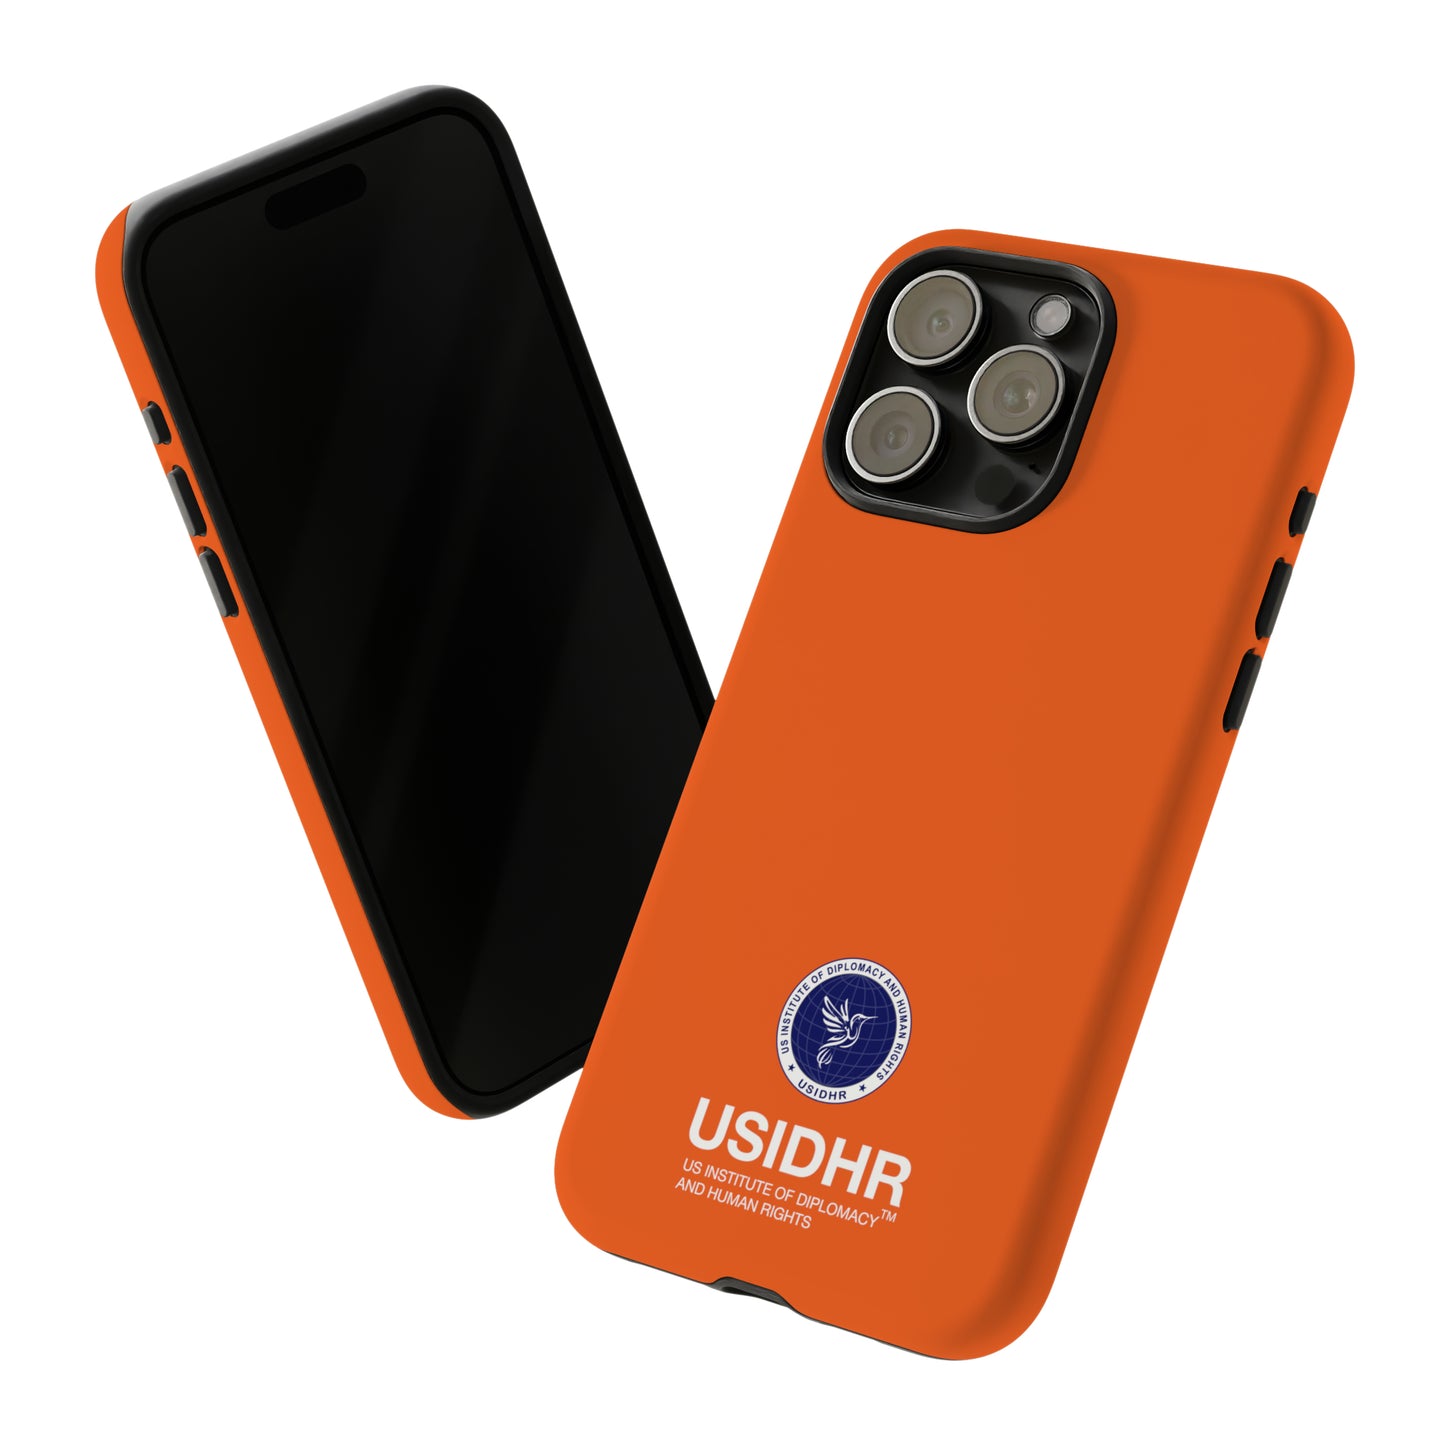 USIDHR Phone Case (compatible with iPhone, Samsung, Google models)